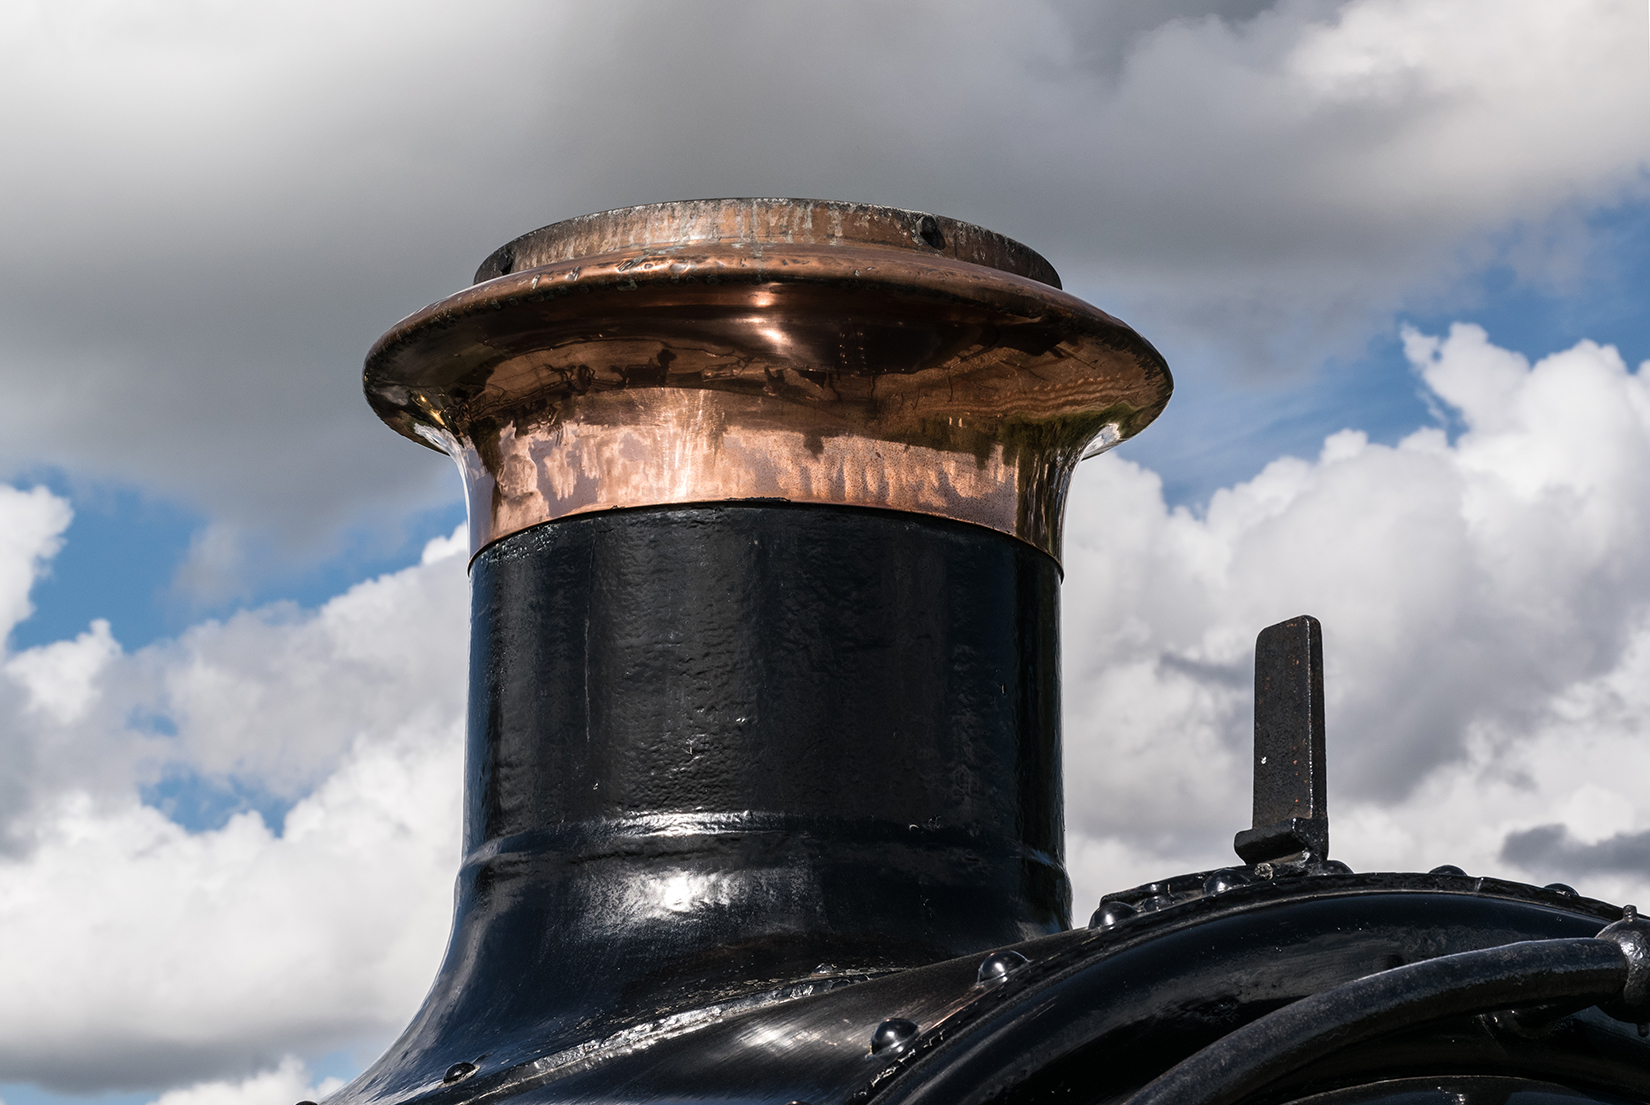 The Great Western Railway copper capped chimney